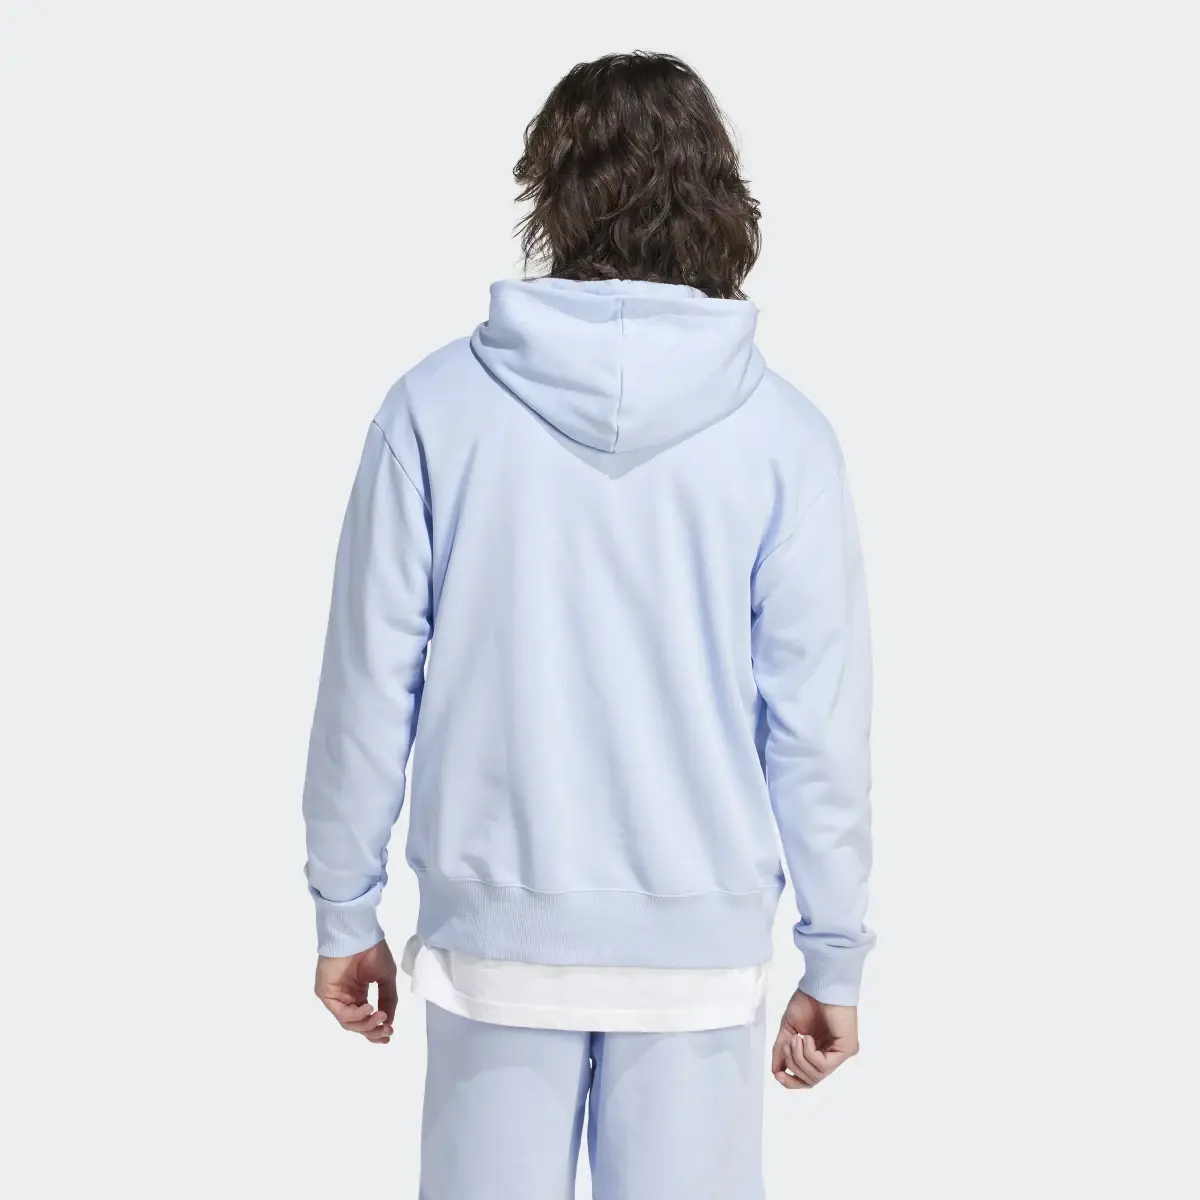 Adidas ALL SZN French Terry Hoodie. 3